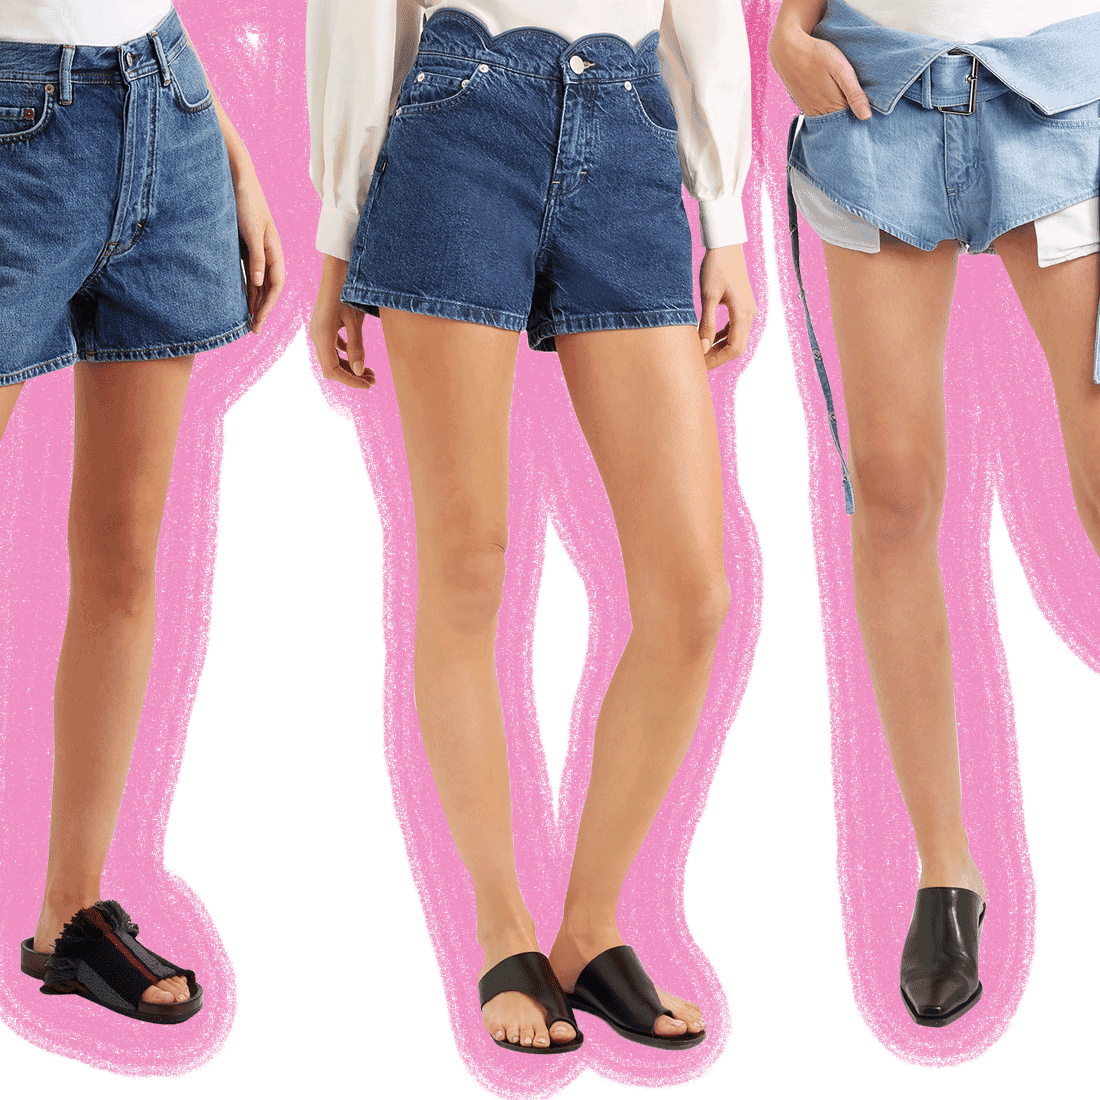 Shop the Best Denim Shorts Styles for Every Age